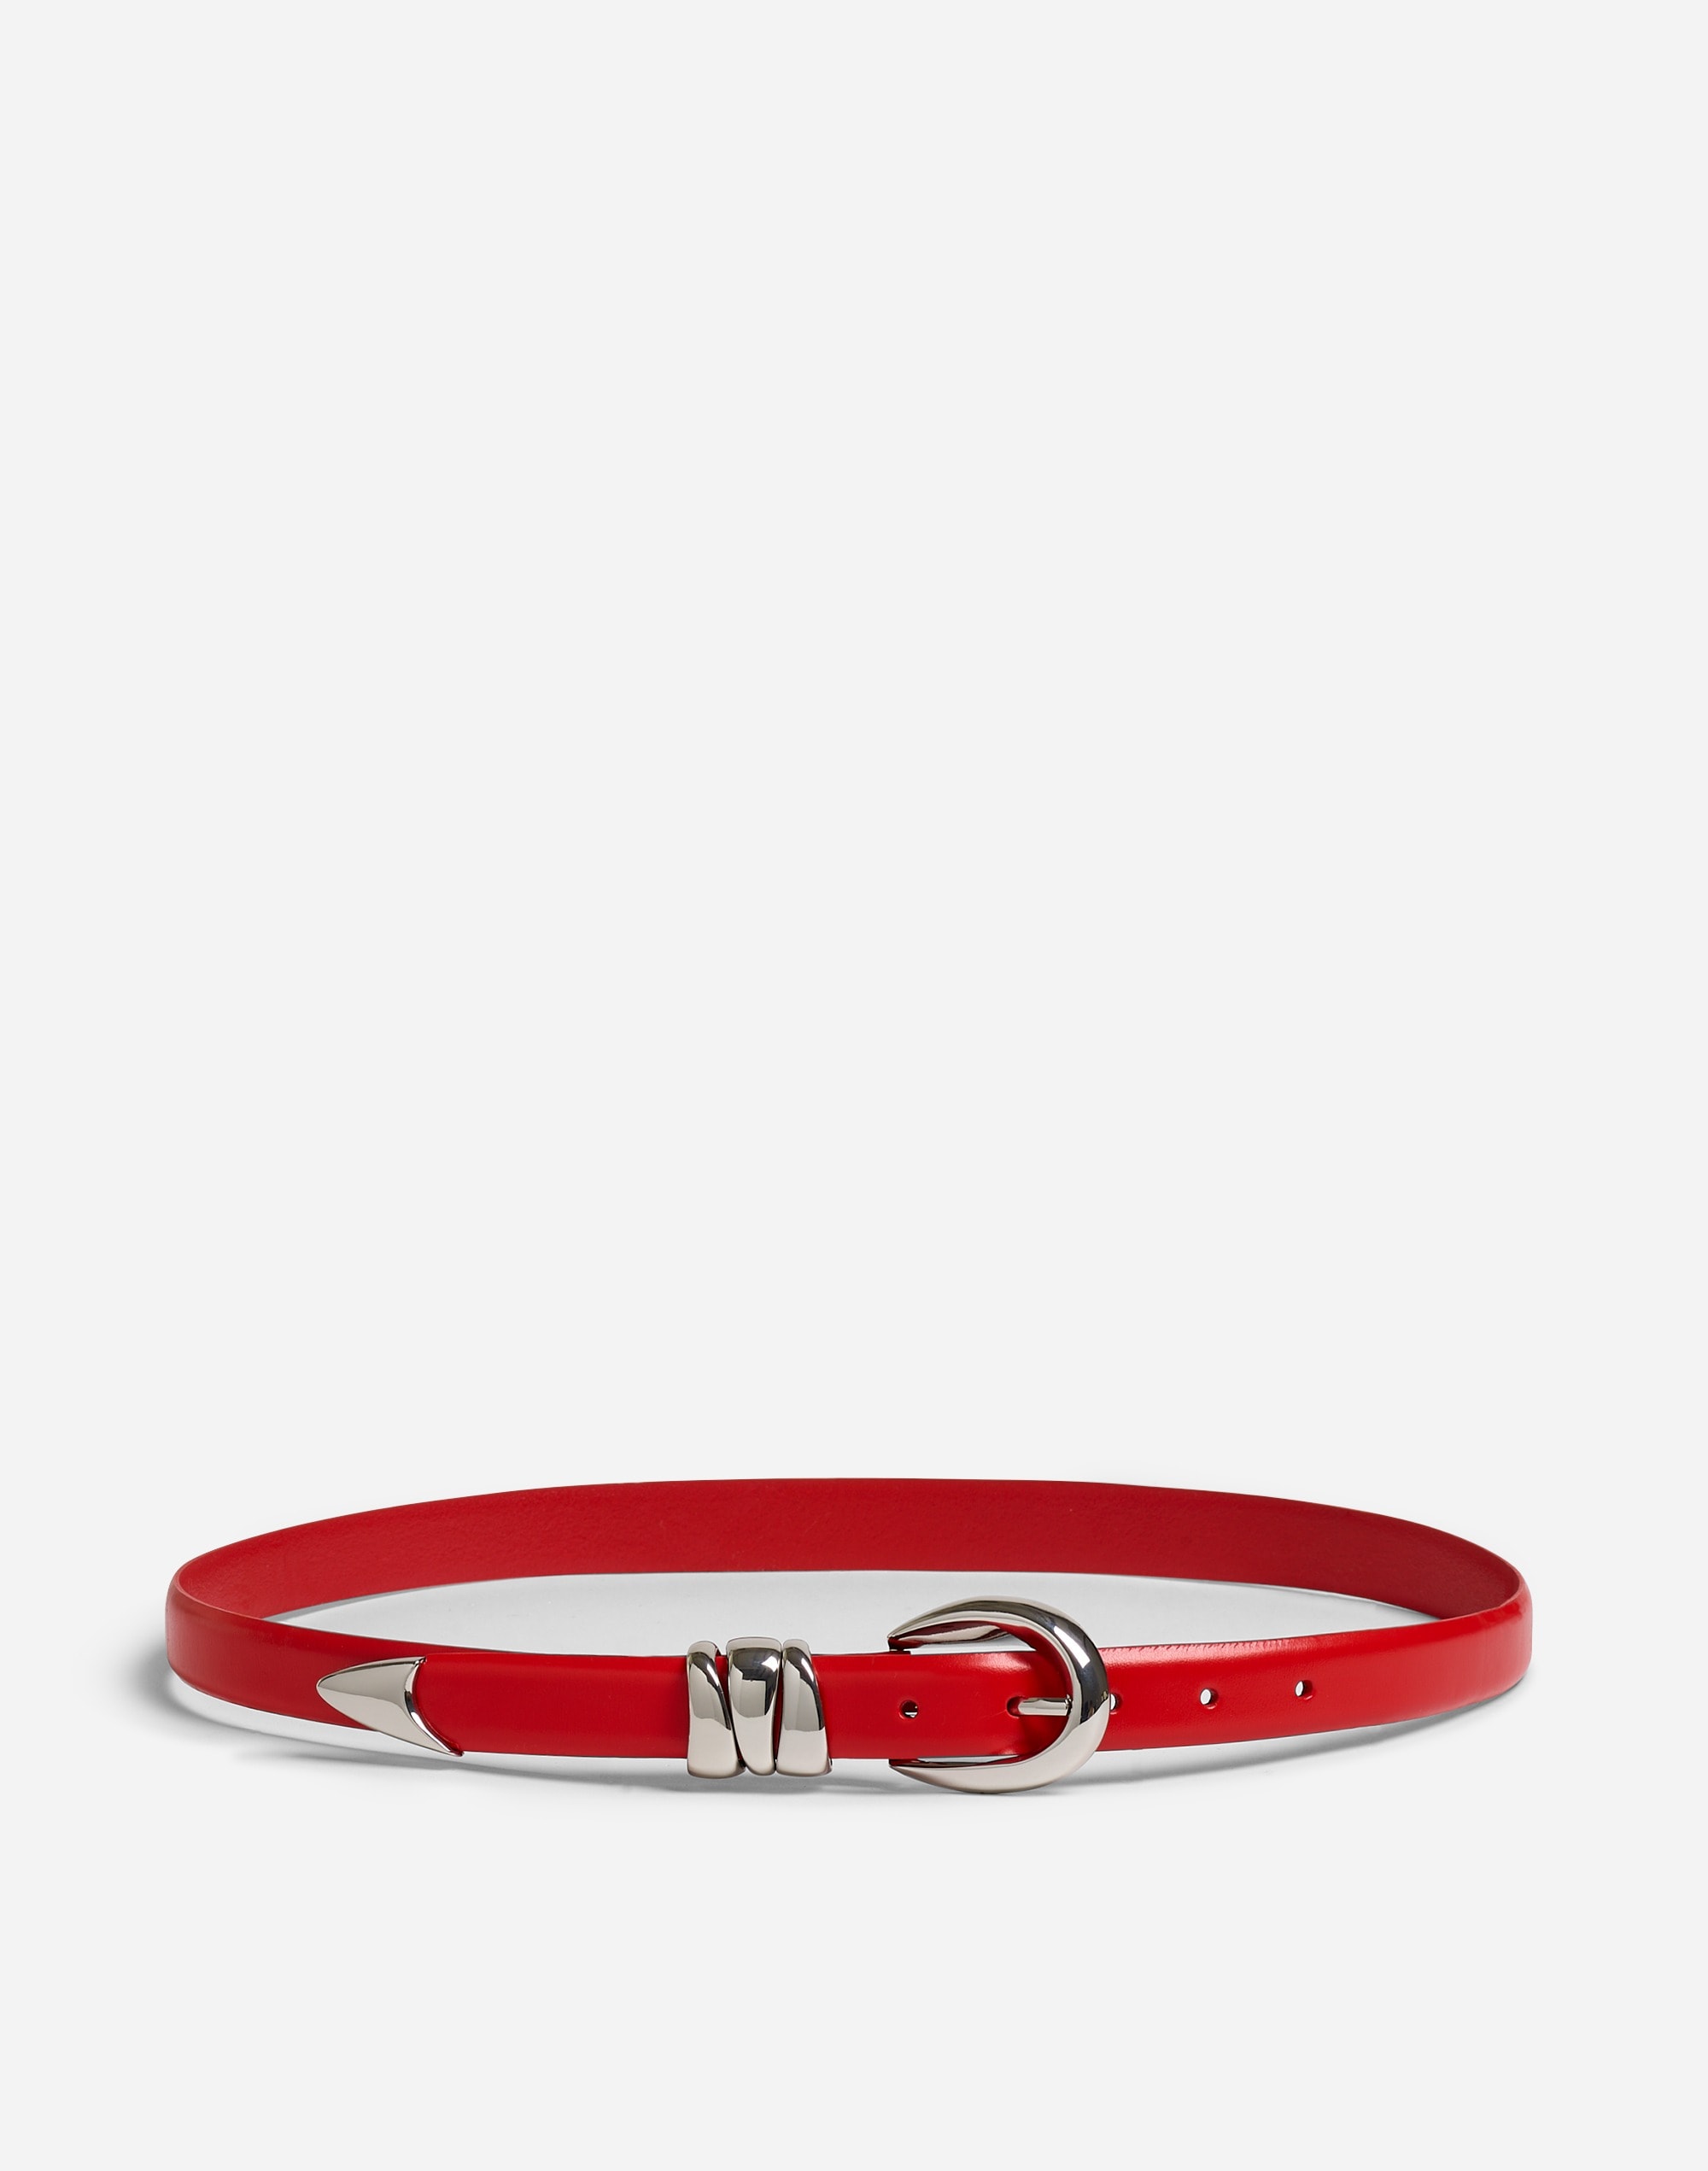 Mw Chunky Metal Leather Belt In Kilt Red